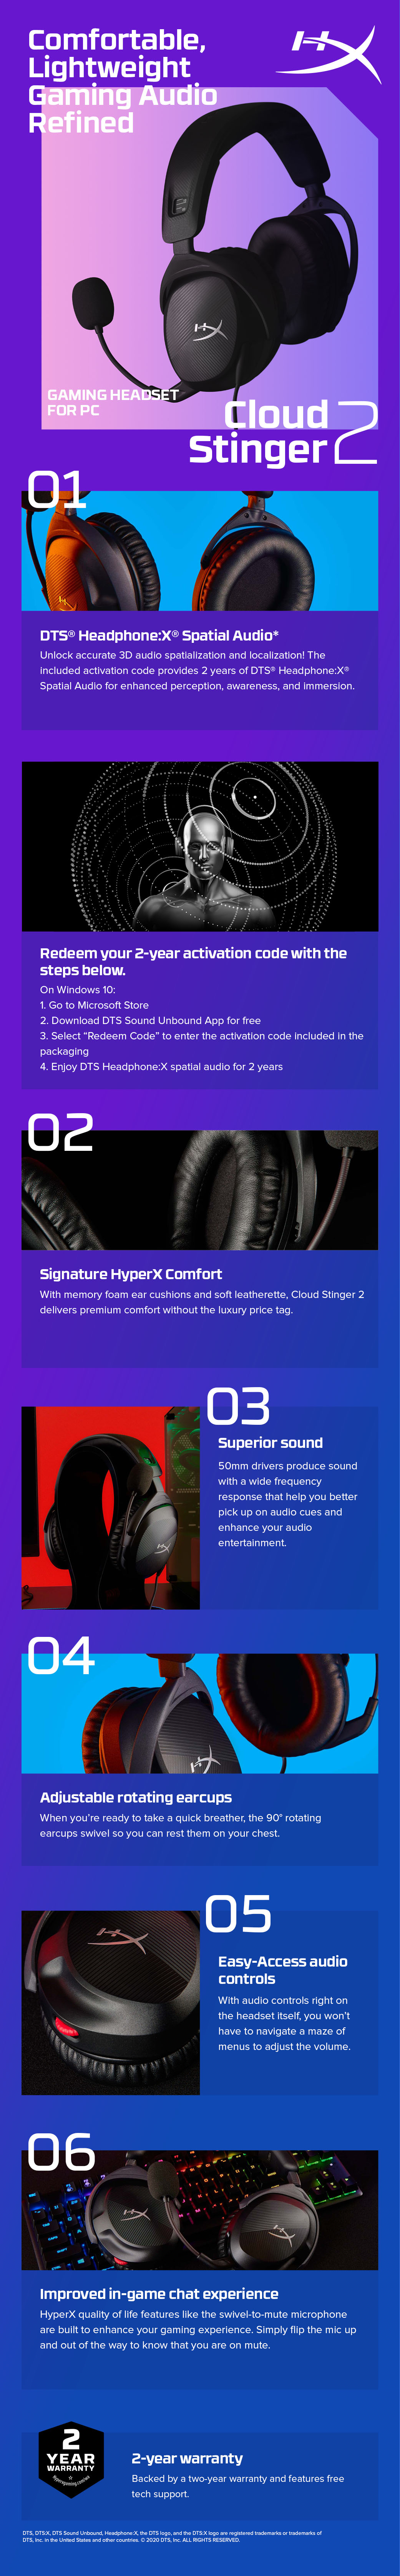 A large marketing image providing additional information about the product HyperX Cloud Stinger 2 - Wired Gaming Headset - Additional alt info not provided